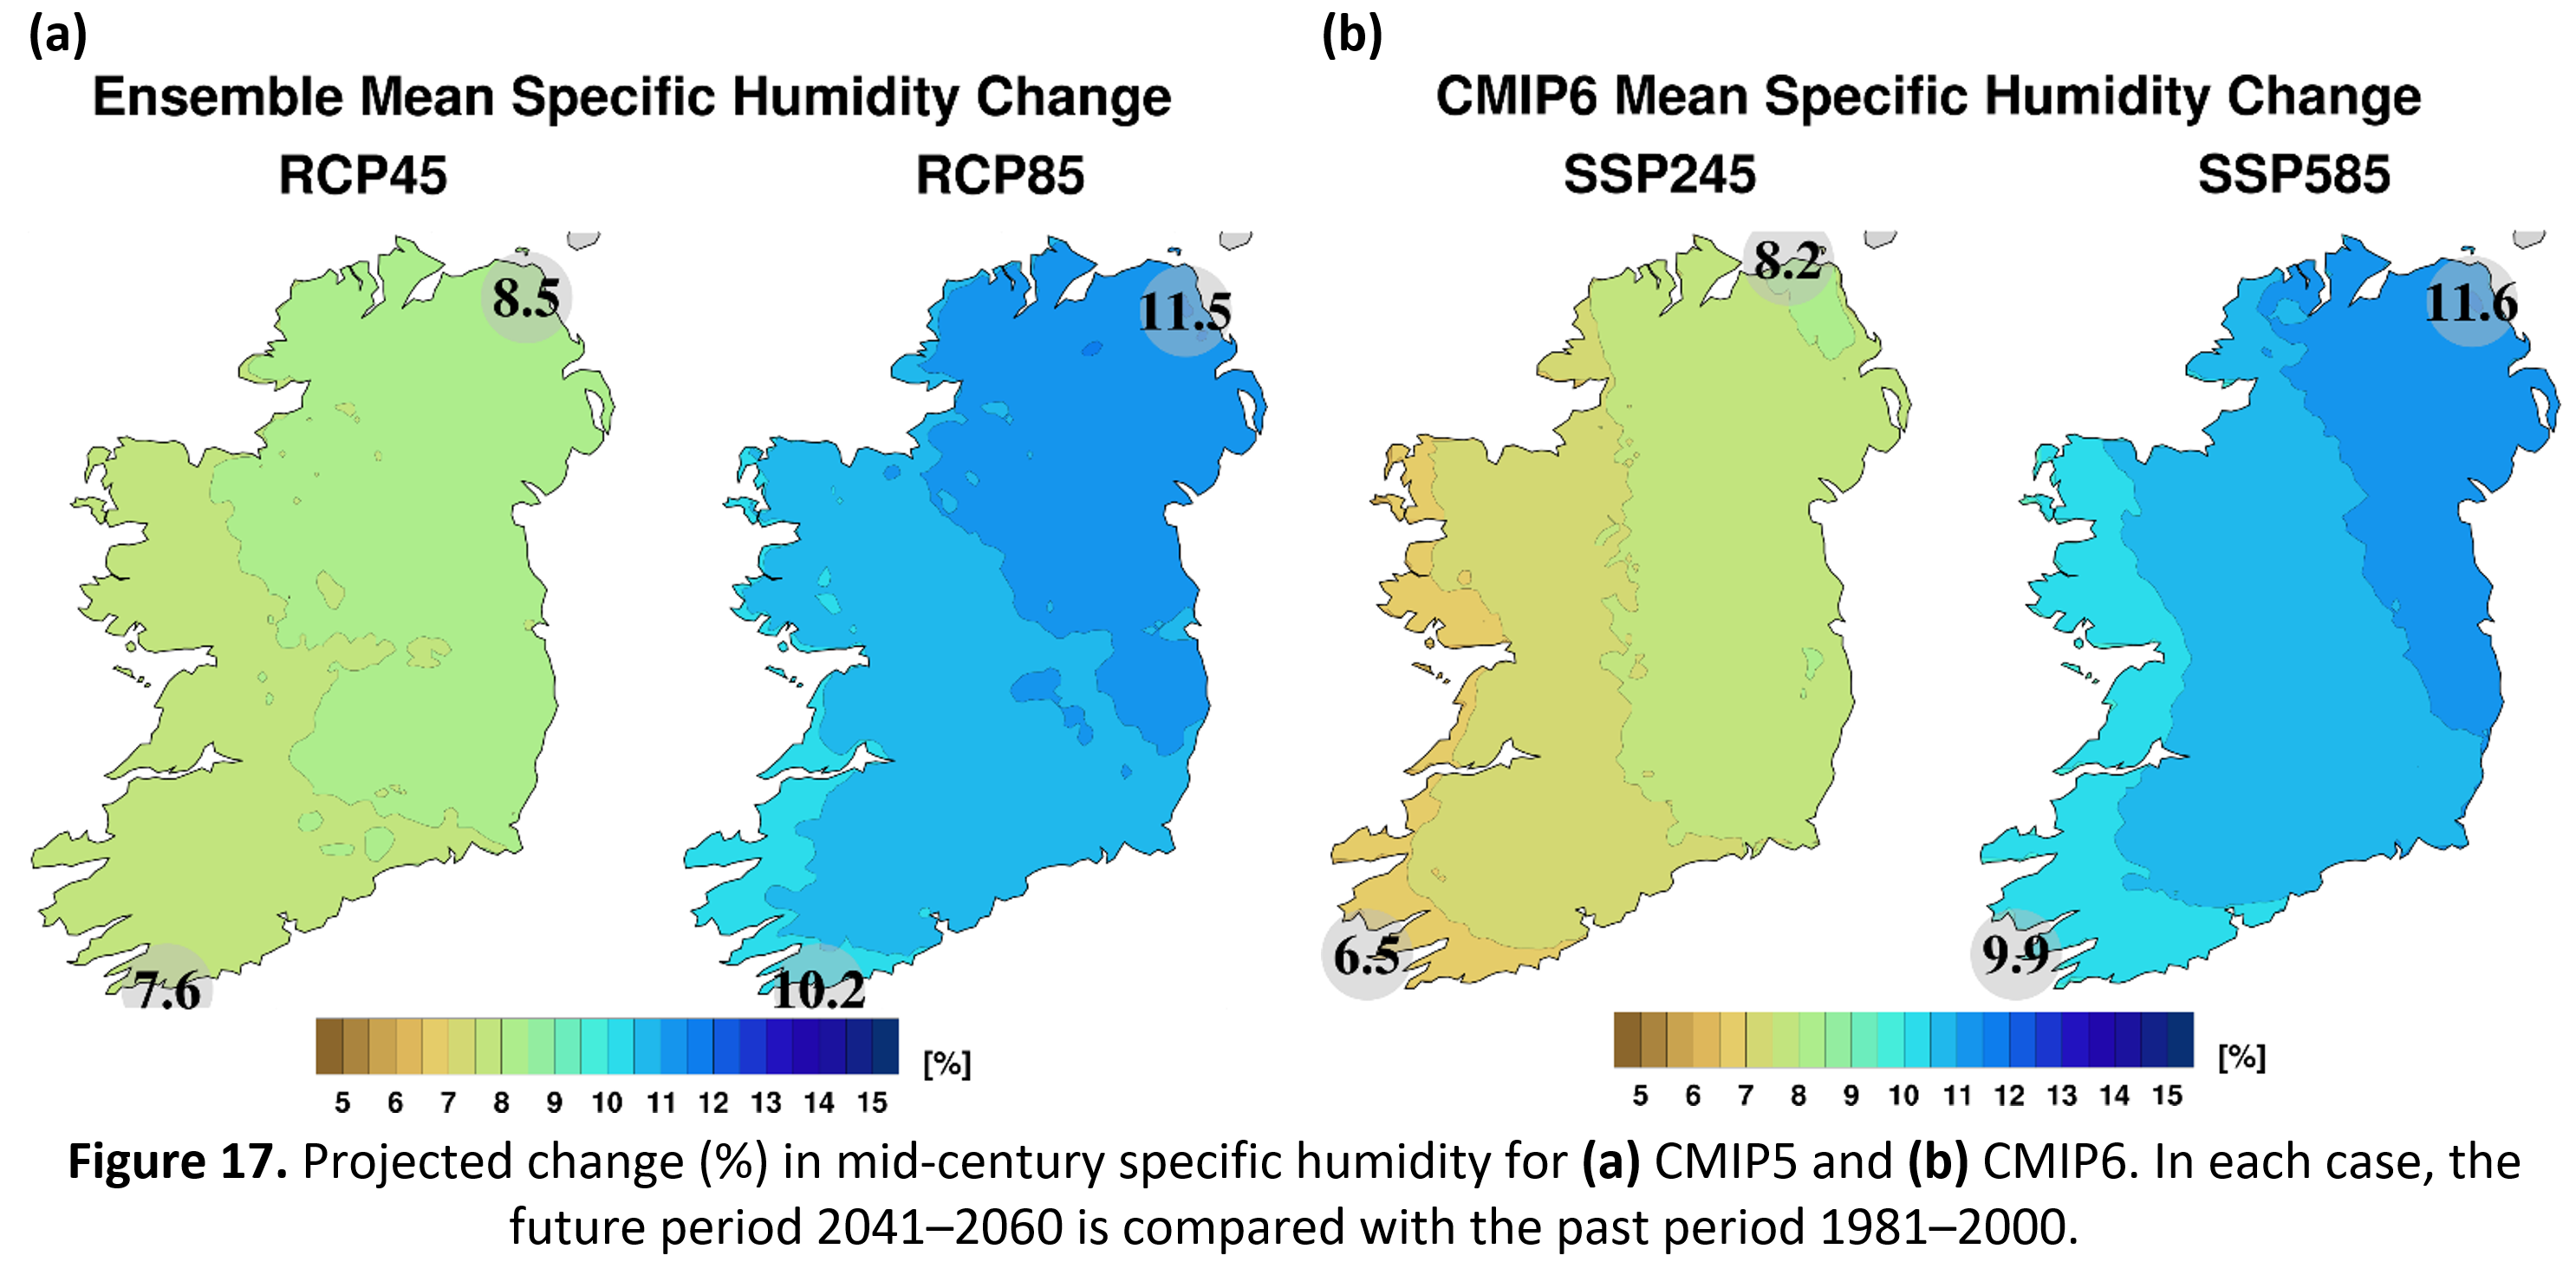 Figure 17. Projected change (%) in mid-century specific humidity for (a) CMIP5 and (b) CMIP6. In each case, the future period 2041–2060 is compared with the past period 1981–2000.